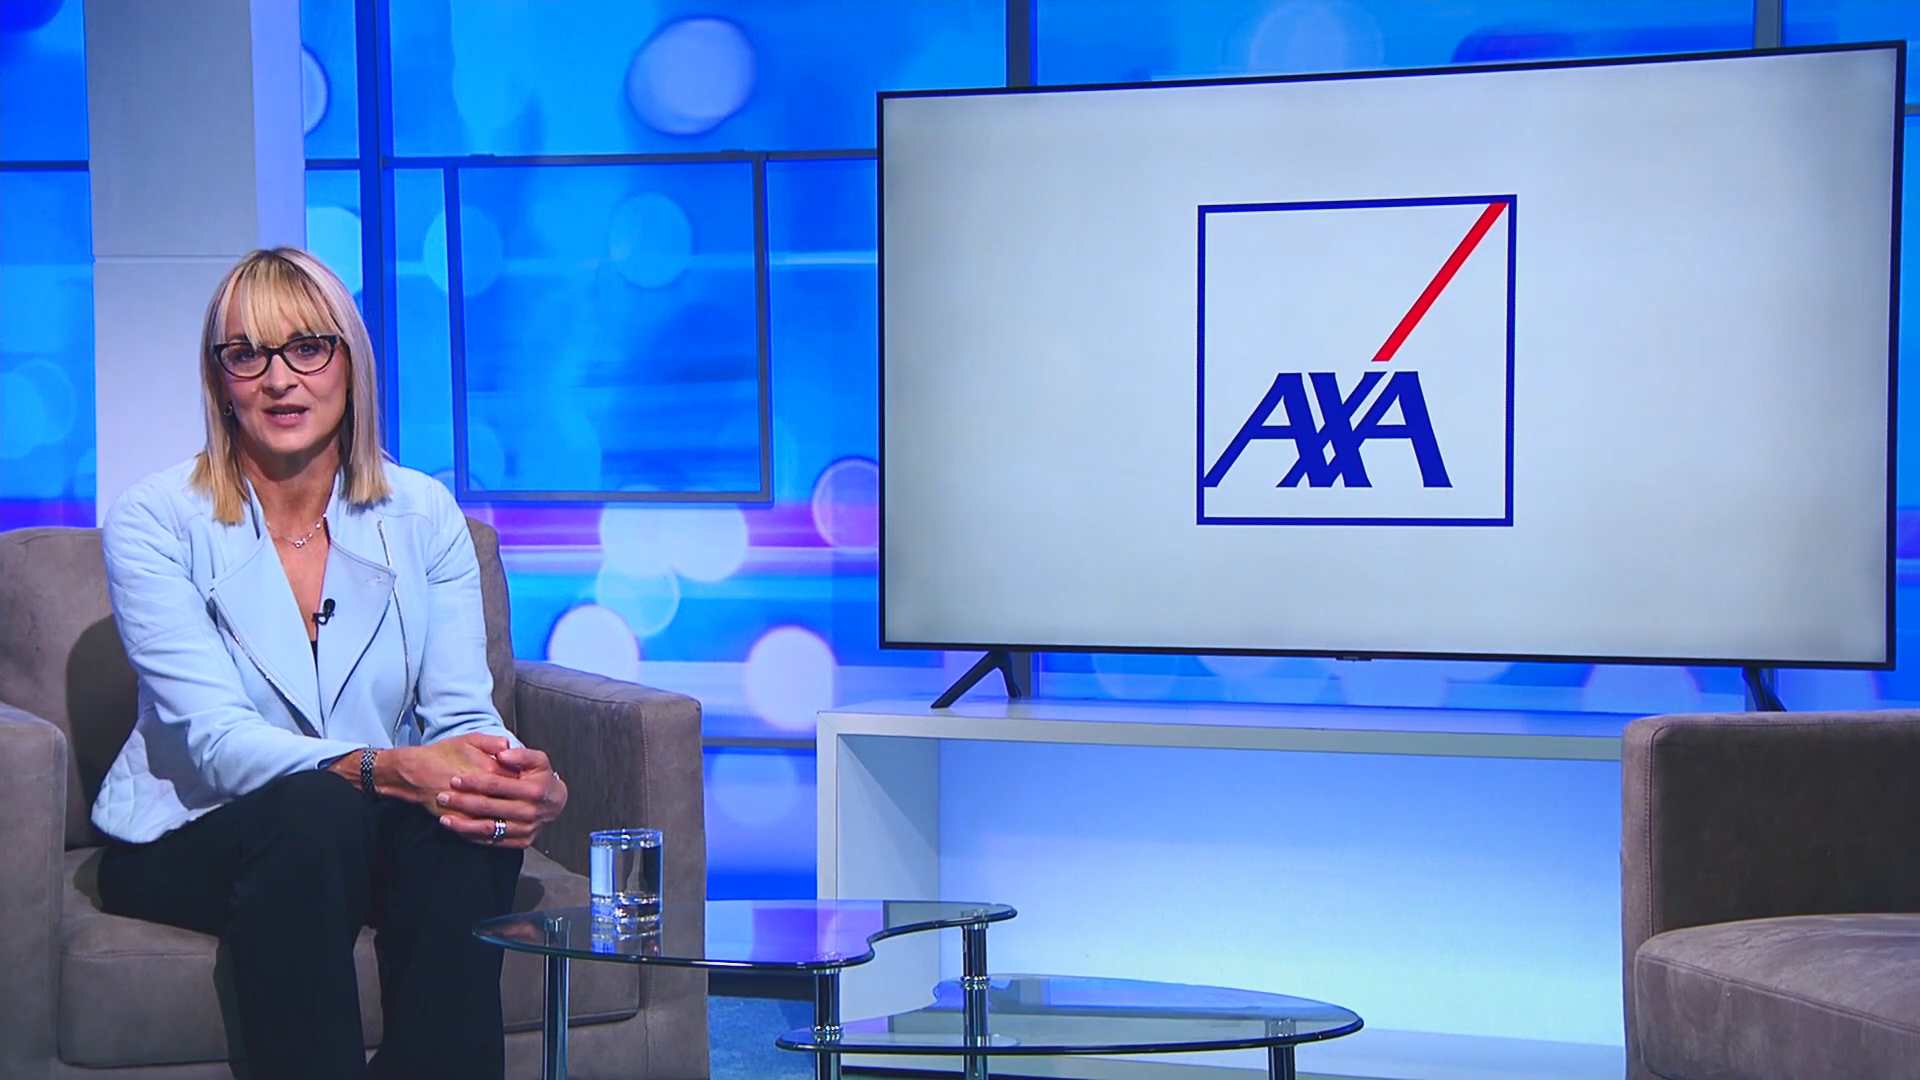 Louise Minchin presenting 'Menopause - Continuing the Conversation' from the ITN London Studio featuring sponsored editorial profiles of AXA employees